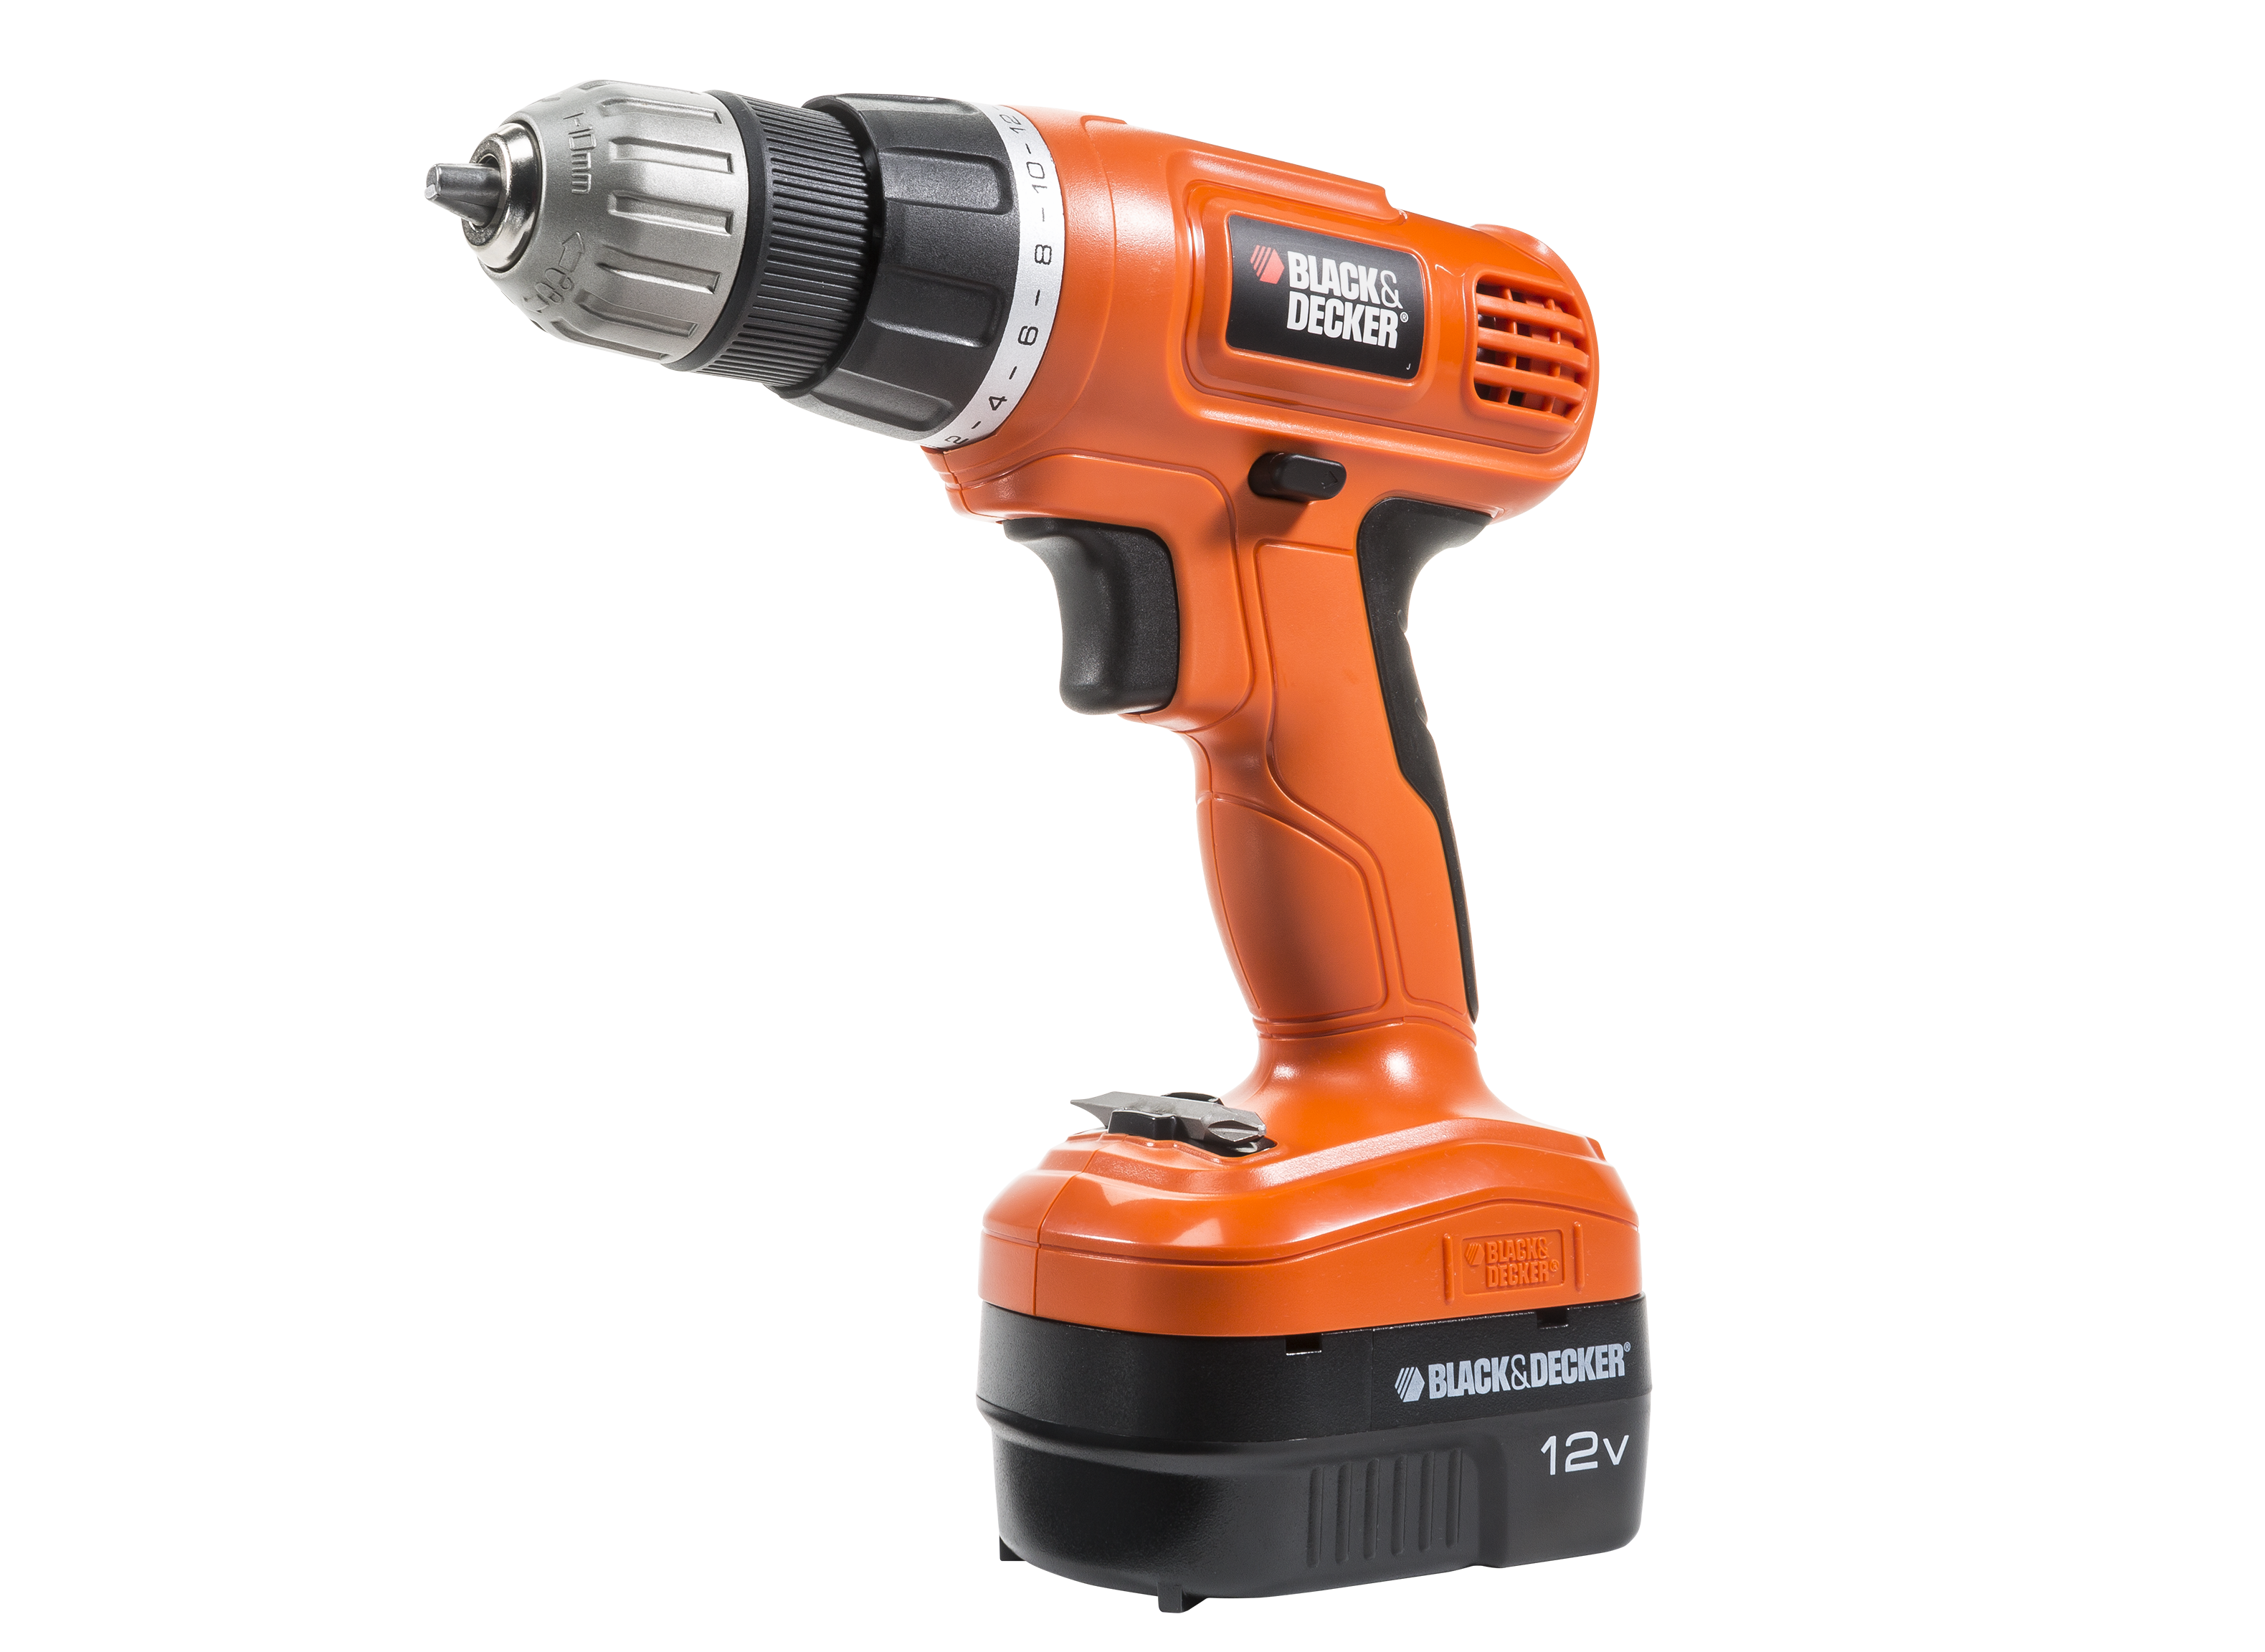 https://crdms.images.consumerreports.org/prod/products/cr/models/388526-cordlessdrills-blackdecker-gco1200c.png